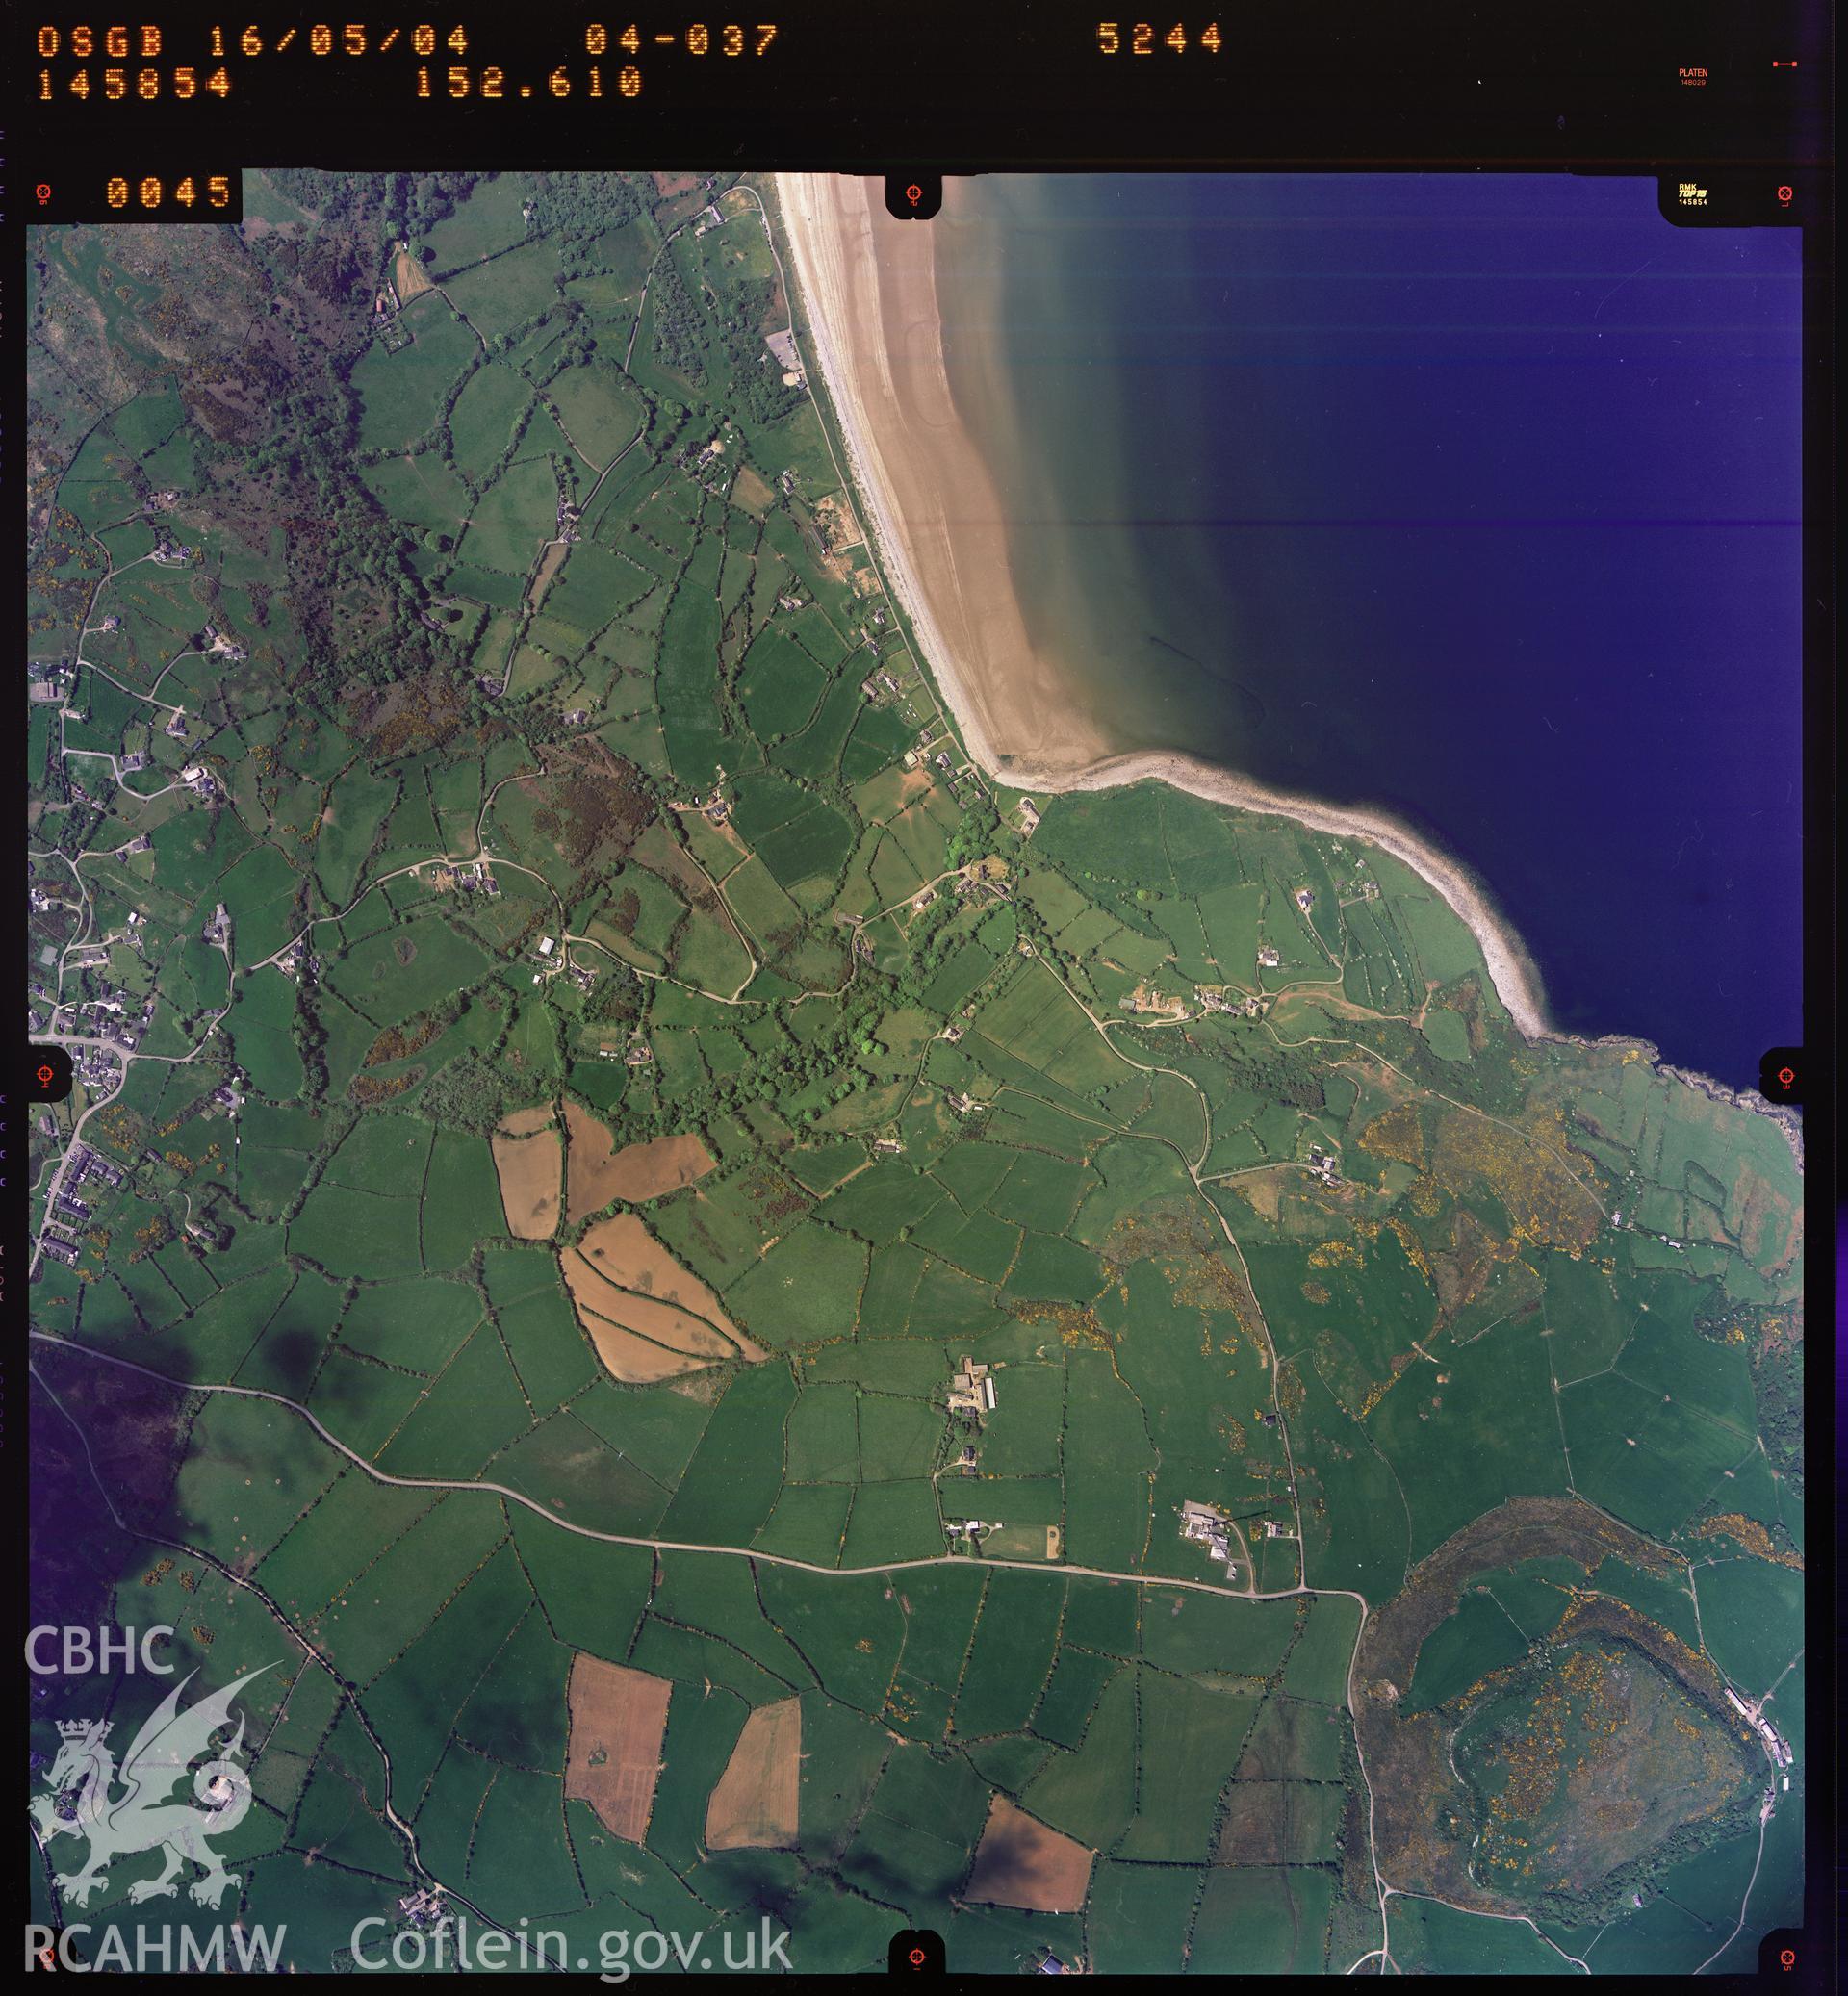 Digitized copy of a colour aerial photograph showing the Pentrellwyn area, taken by Ordnance Survey, 2004.